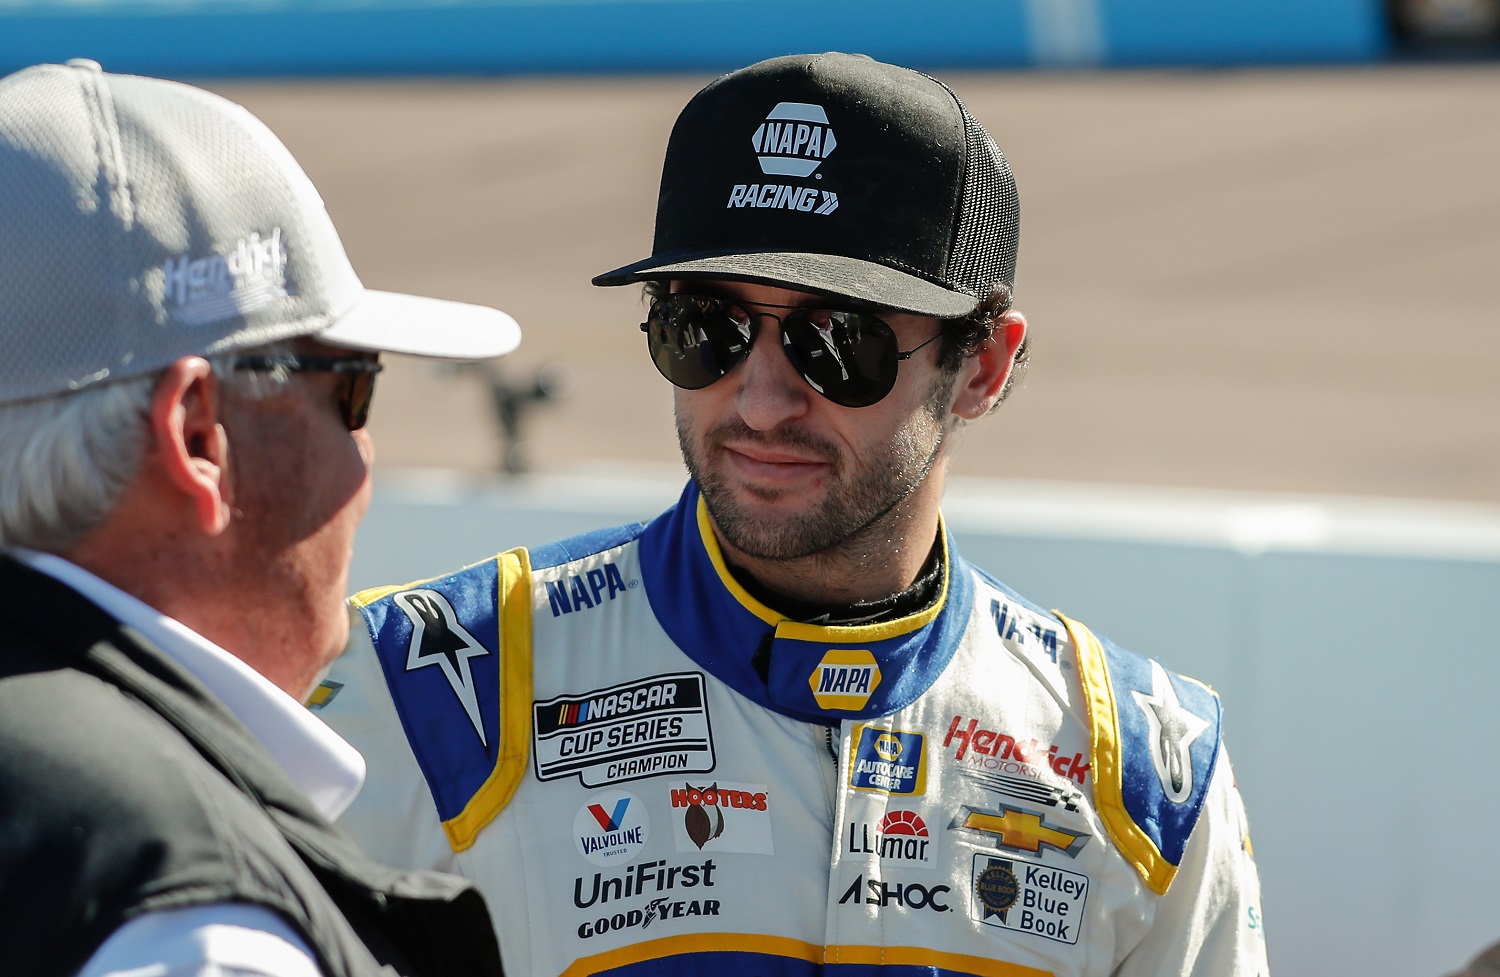 Chase Elliott looks on before the NASCAR Cup Series Championship Race on Nov. 6, 2022, at Phoenix Raceway in Avondale, Arizona. | Kevin Abele/Icon Sportswire via Getty Images